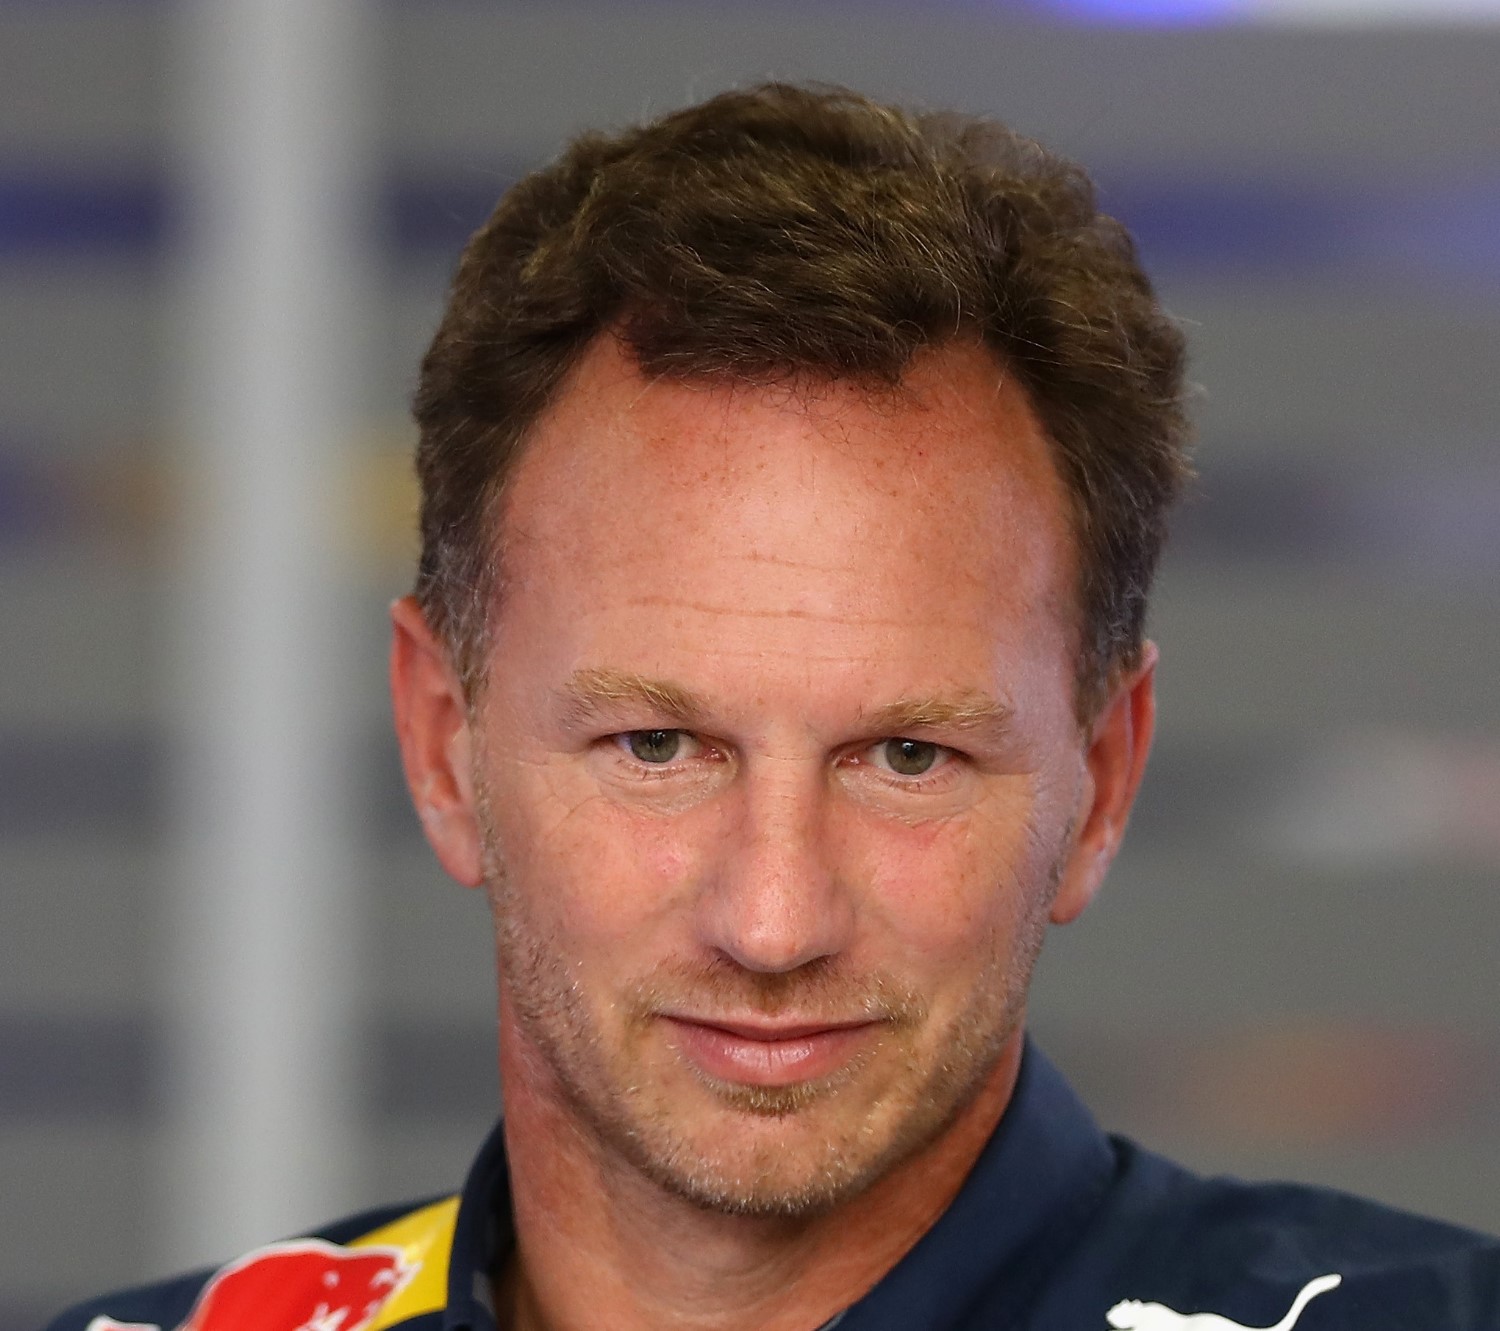 Christian Horner knows his Red Bulls are too slow